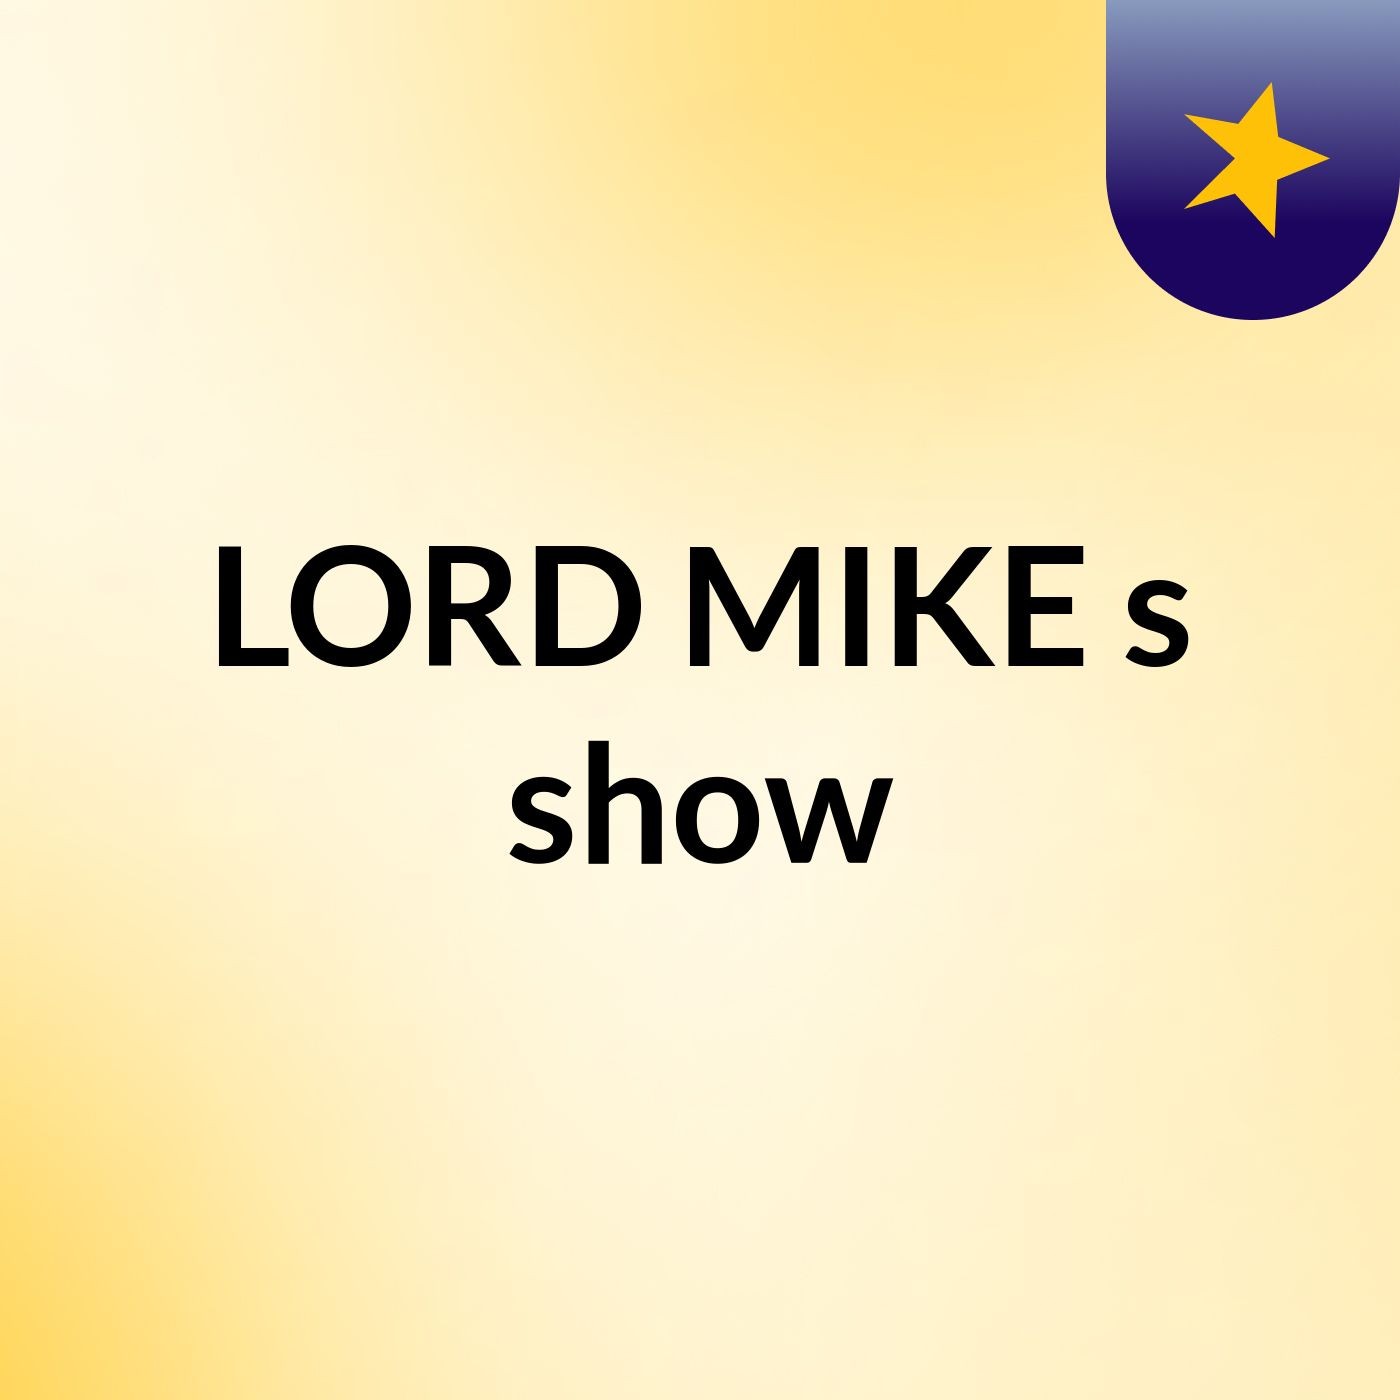 LORD MIKE's show